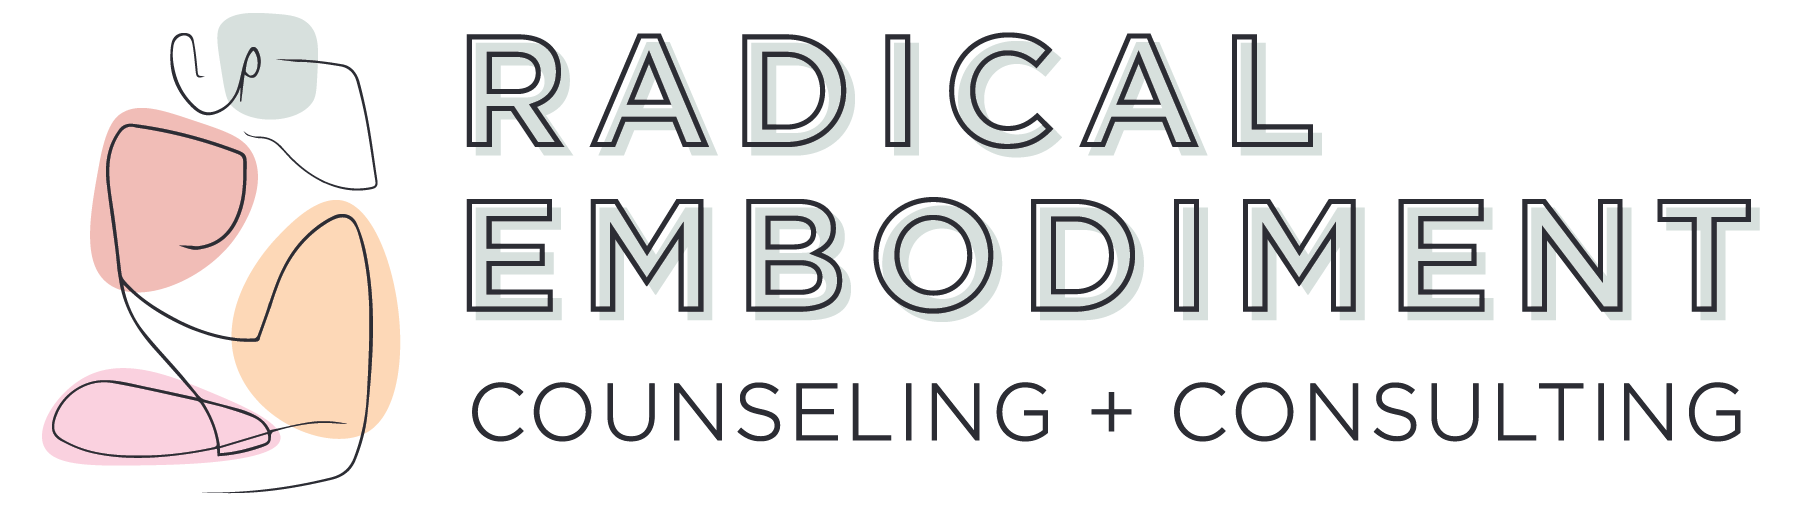 Radical Embodiment Counseling + Consulting